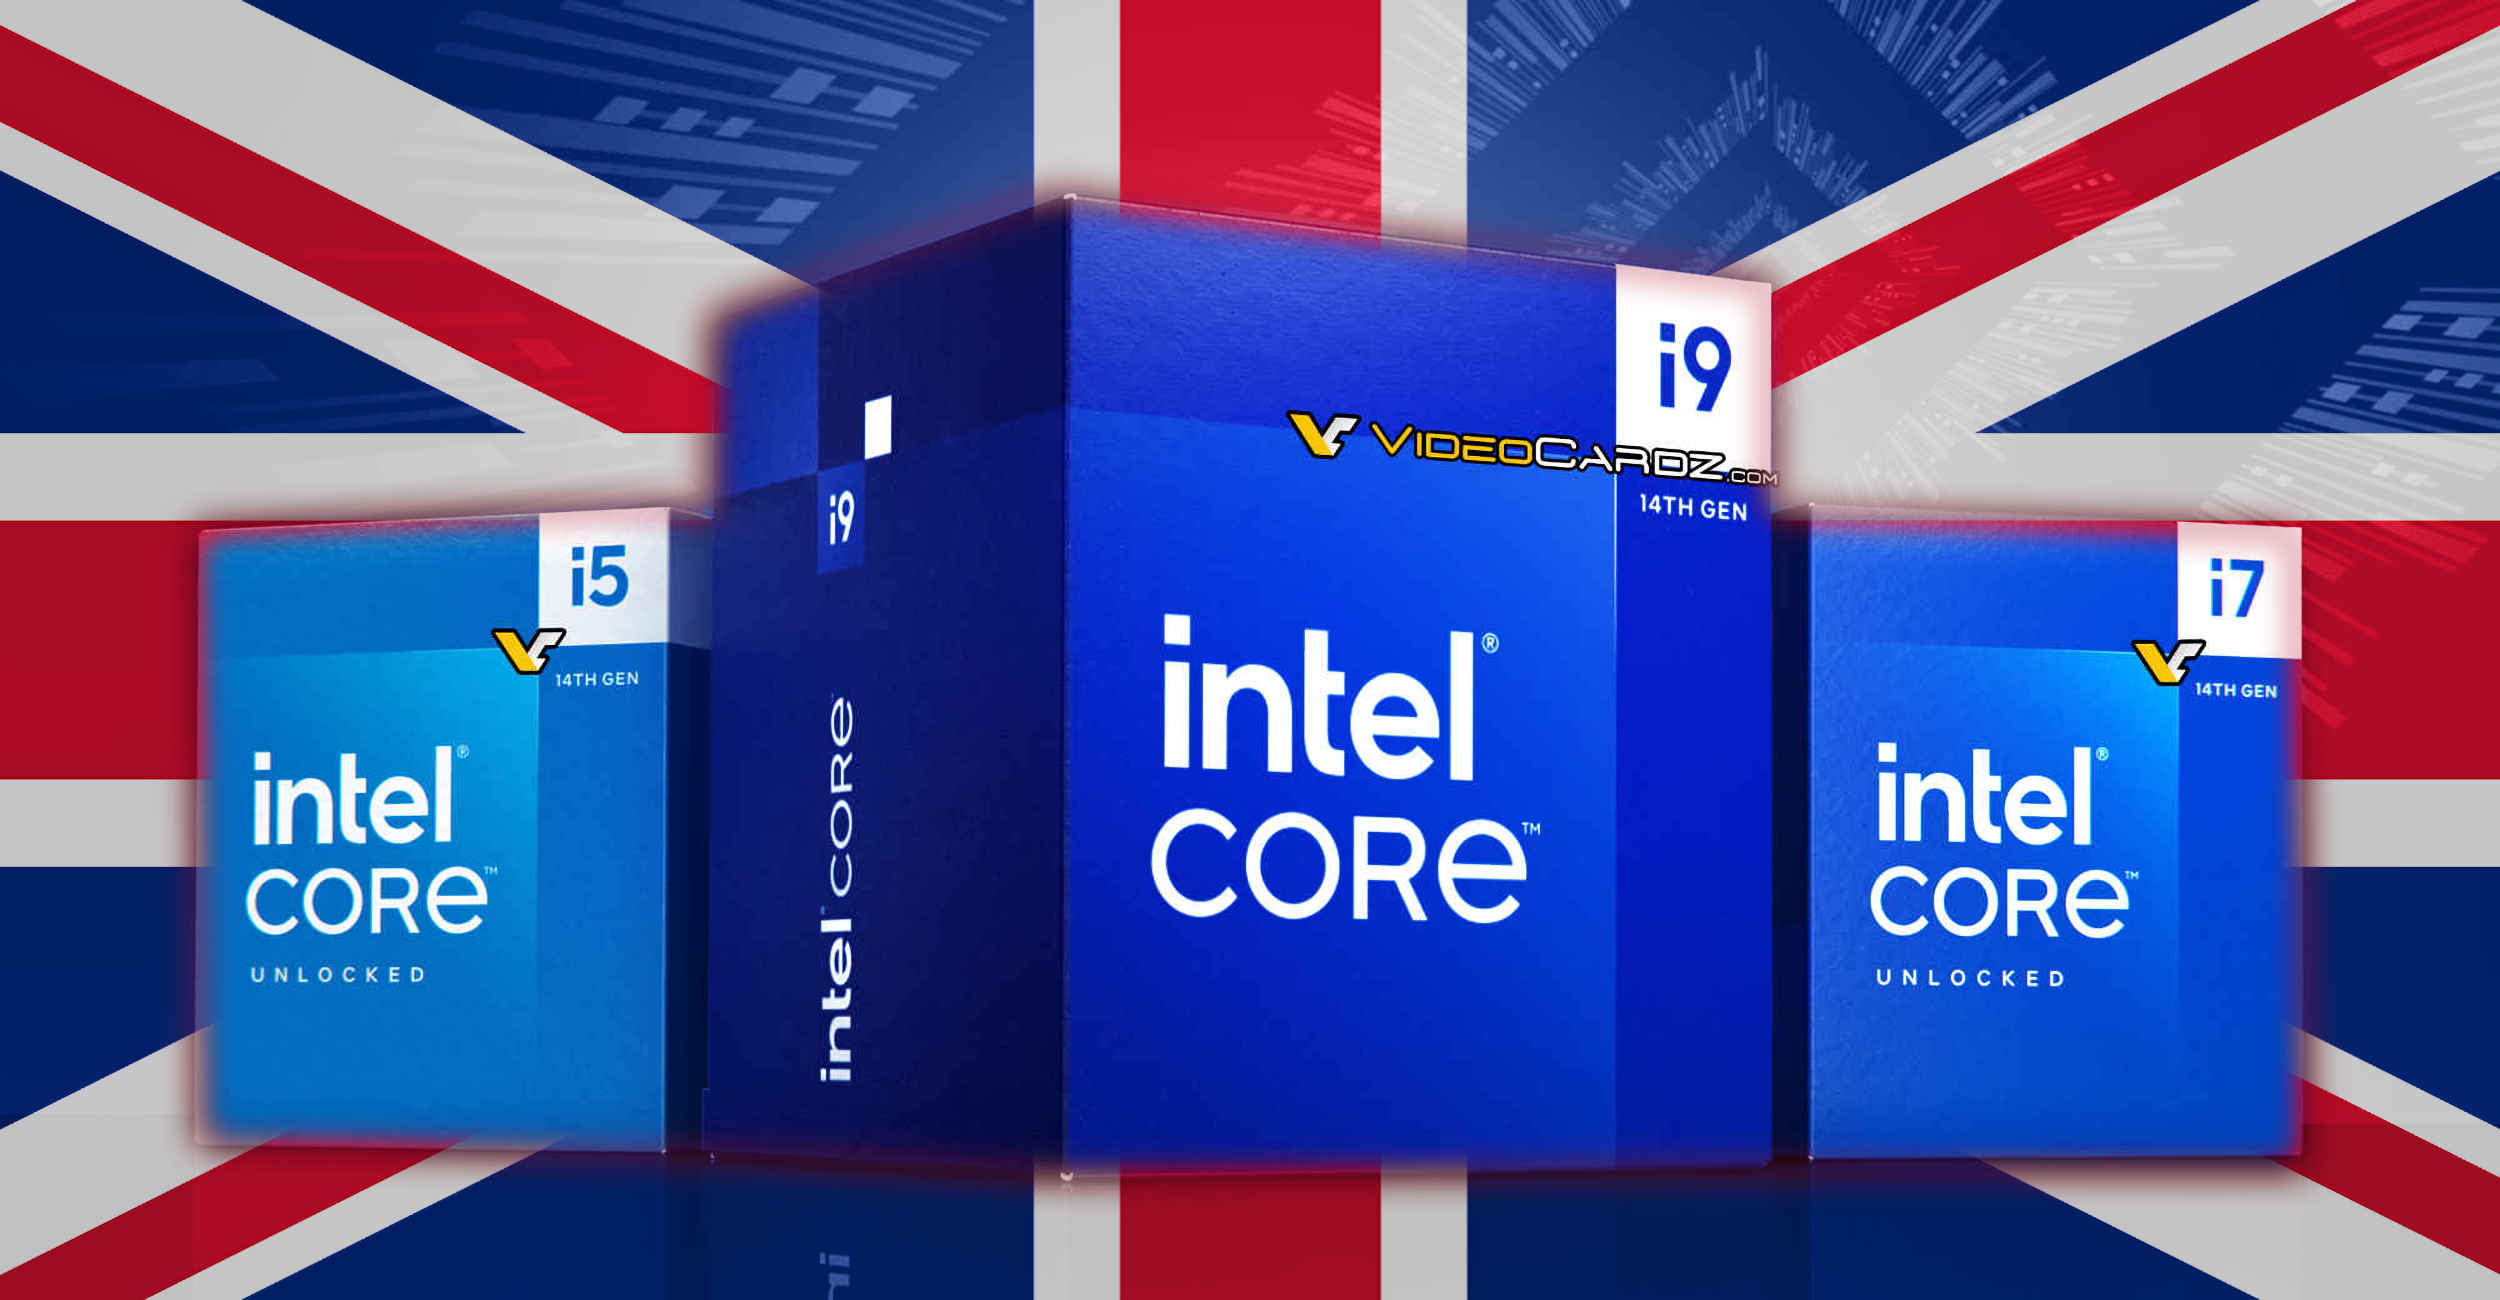 Intel debuts competitively-priced Core i9 X Series for extreme performance